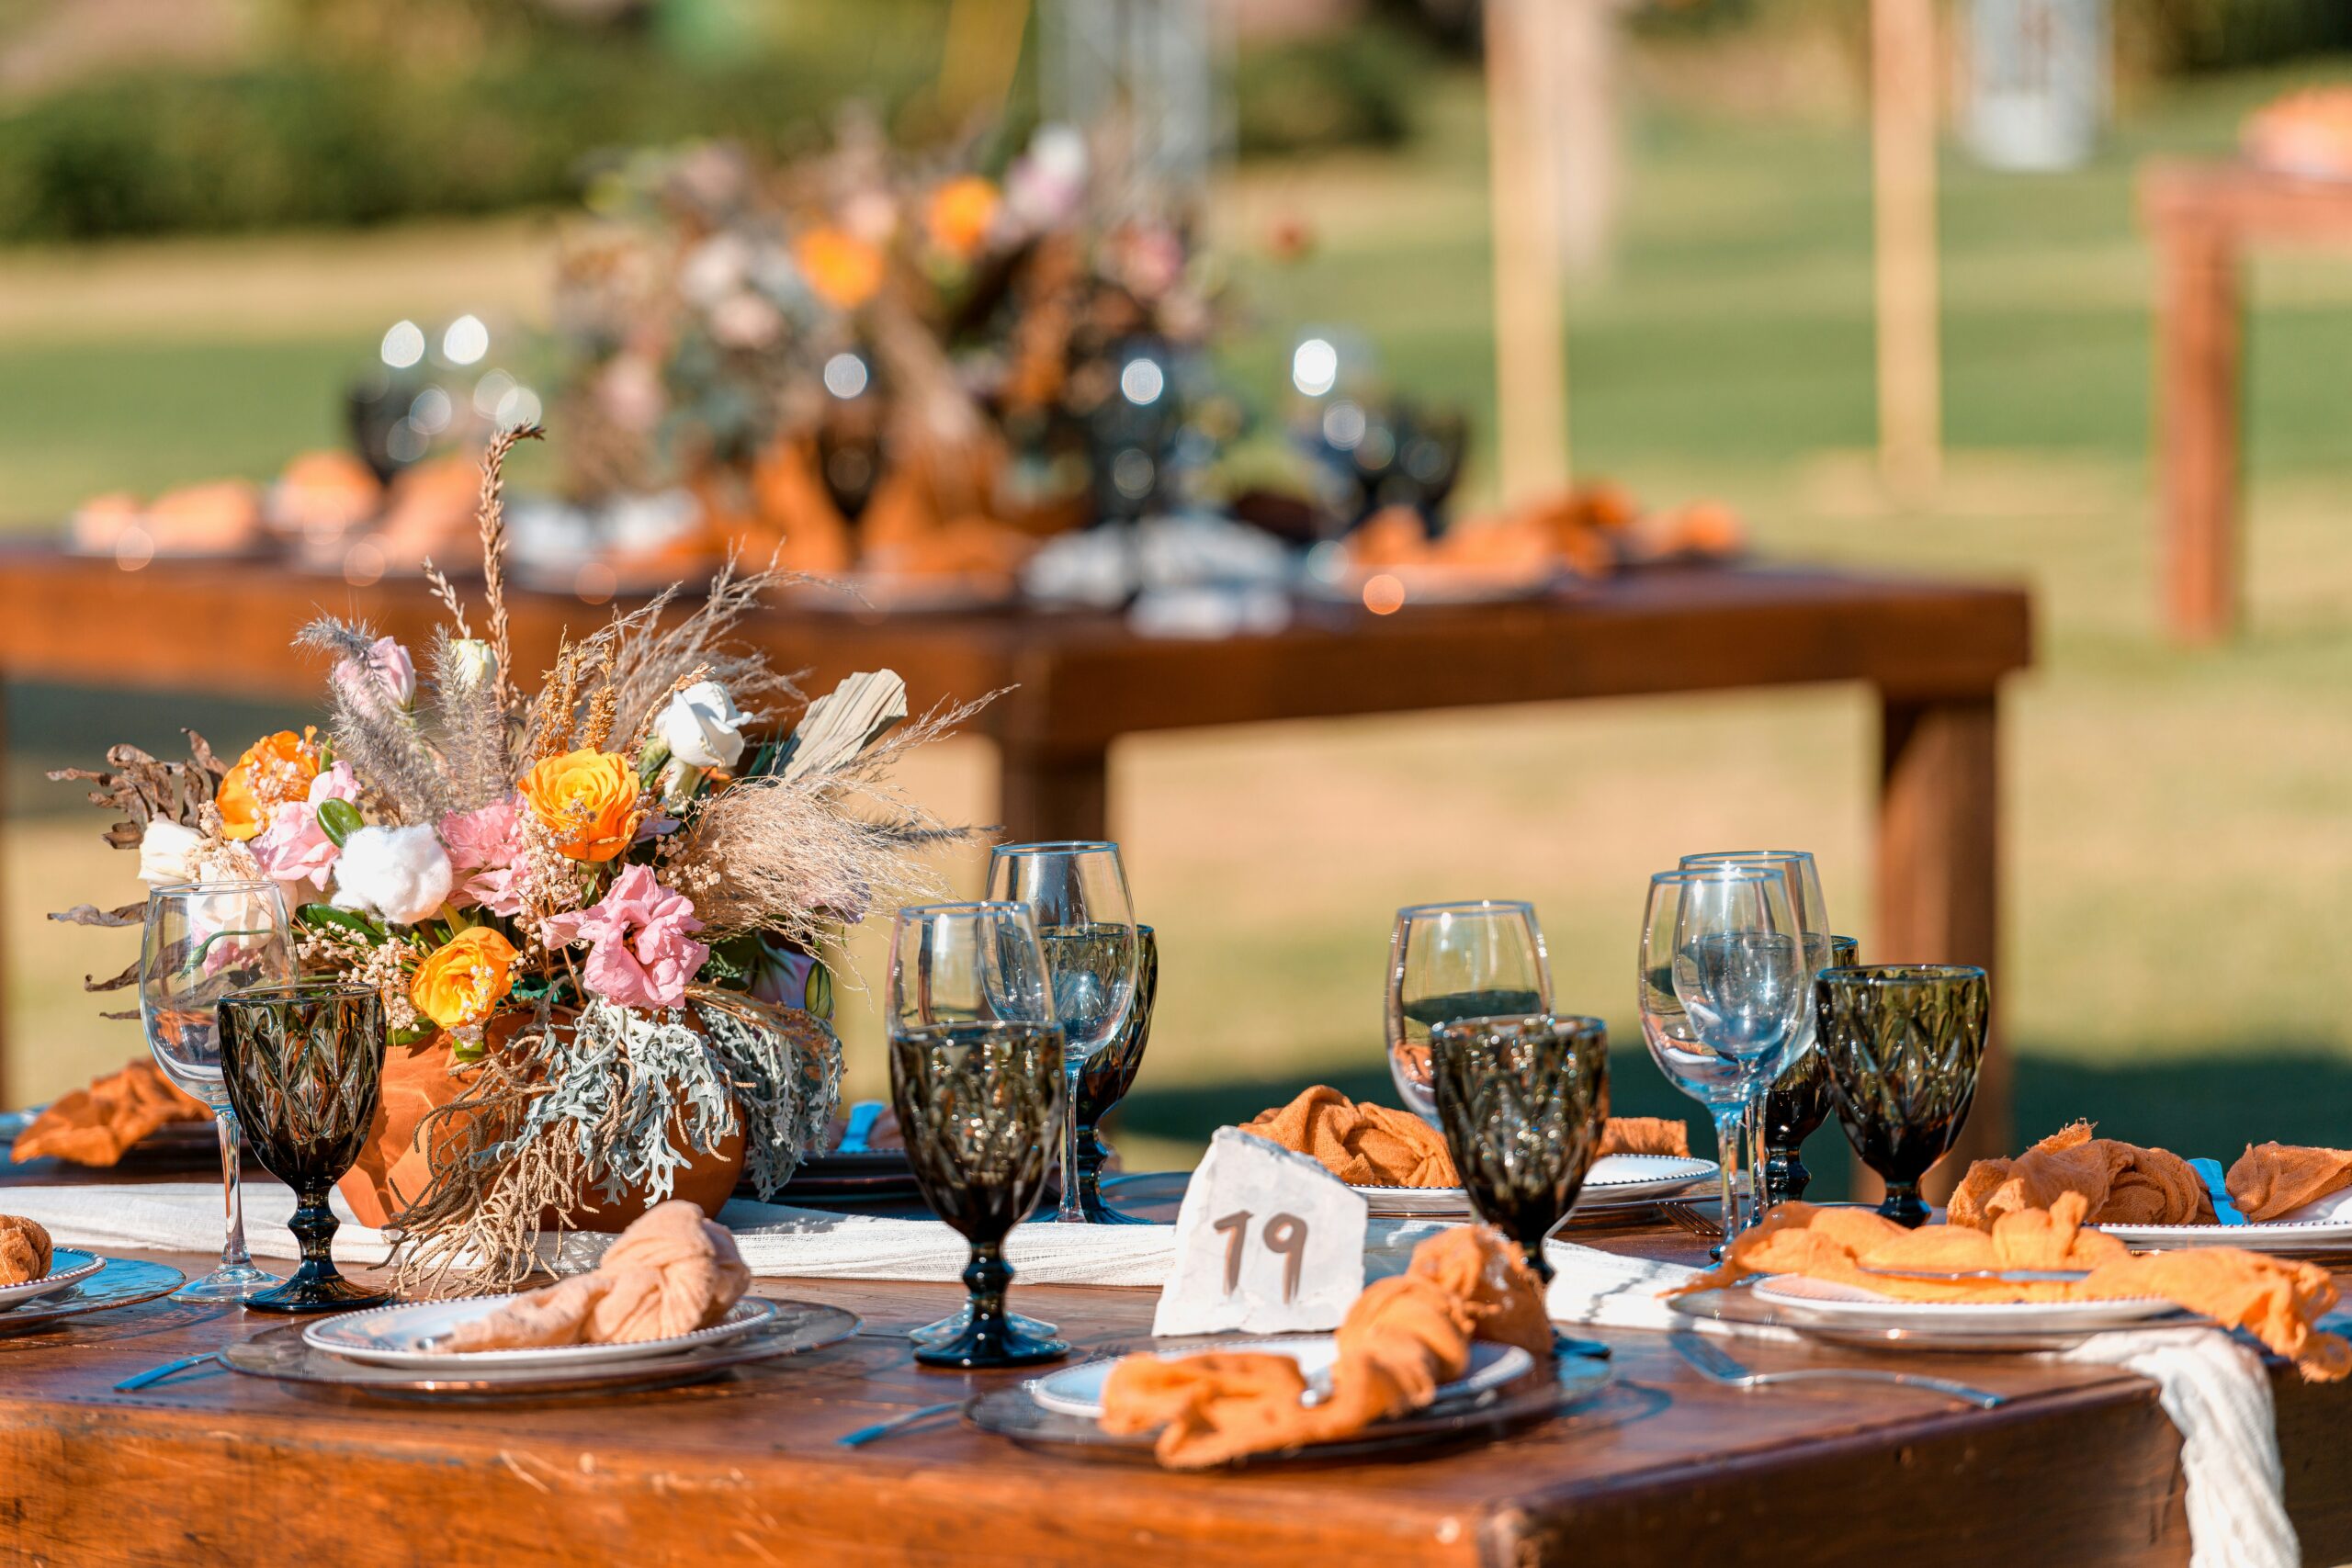 Wedding table decorations and flowers with dinnerware.